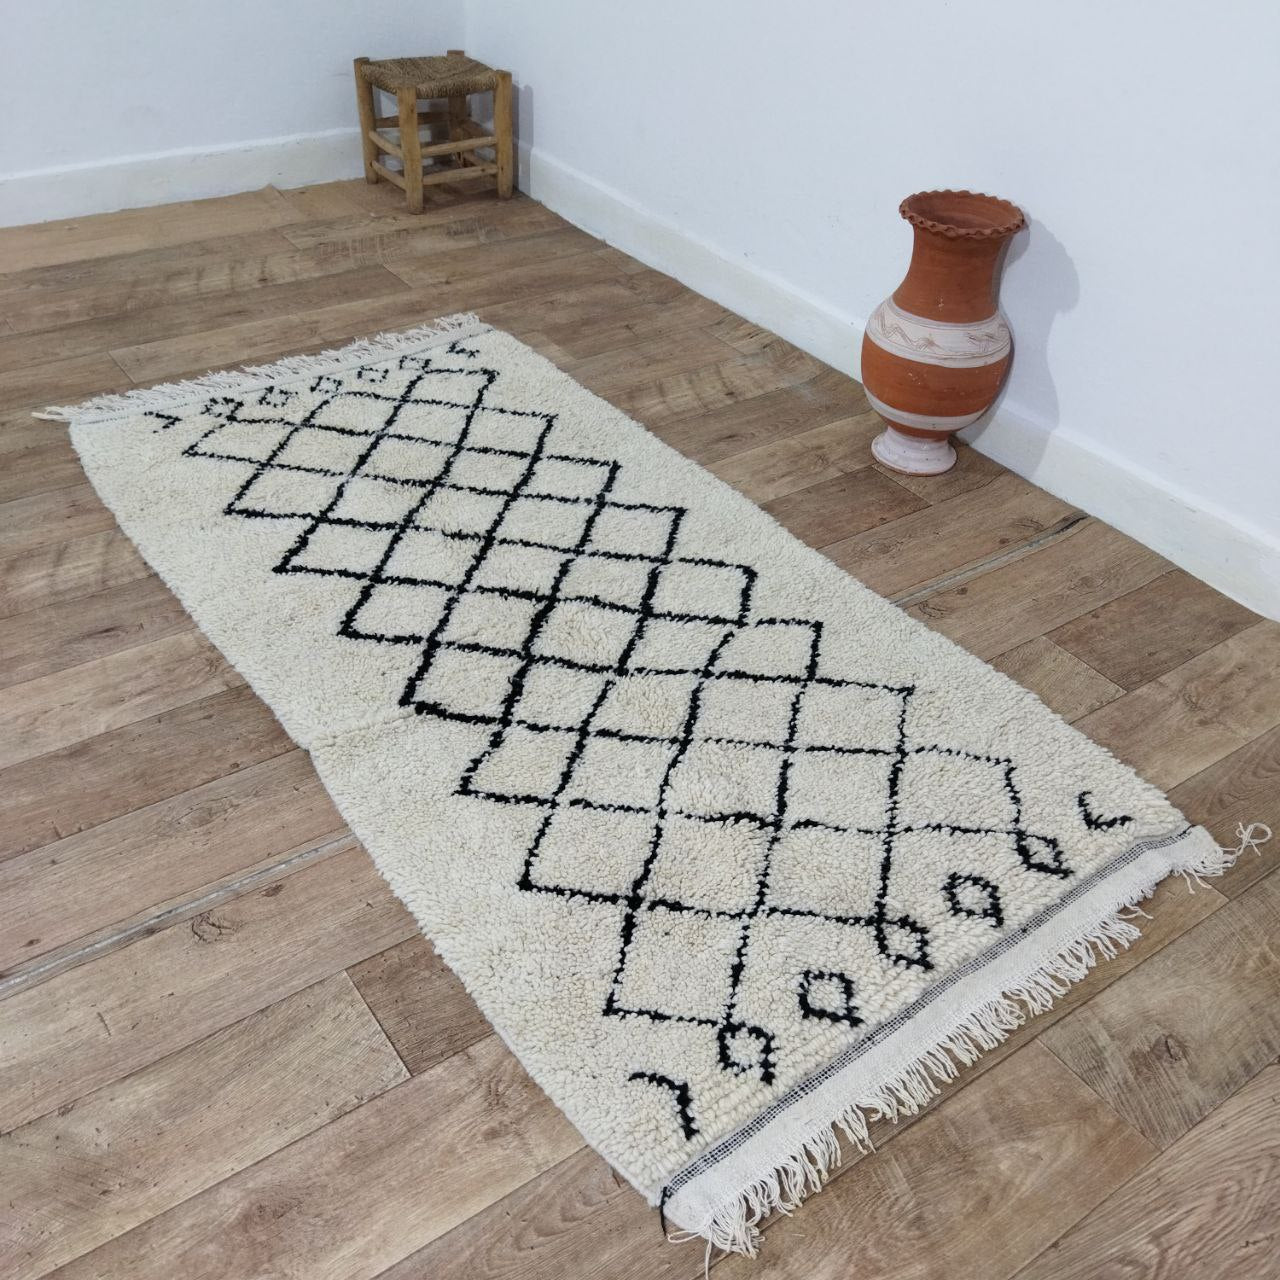 Authentic Beni Ourain Moroccan Berber Runner Rug with Black lines